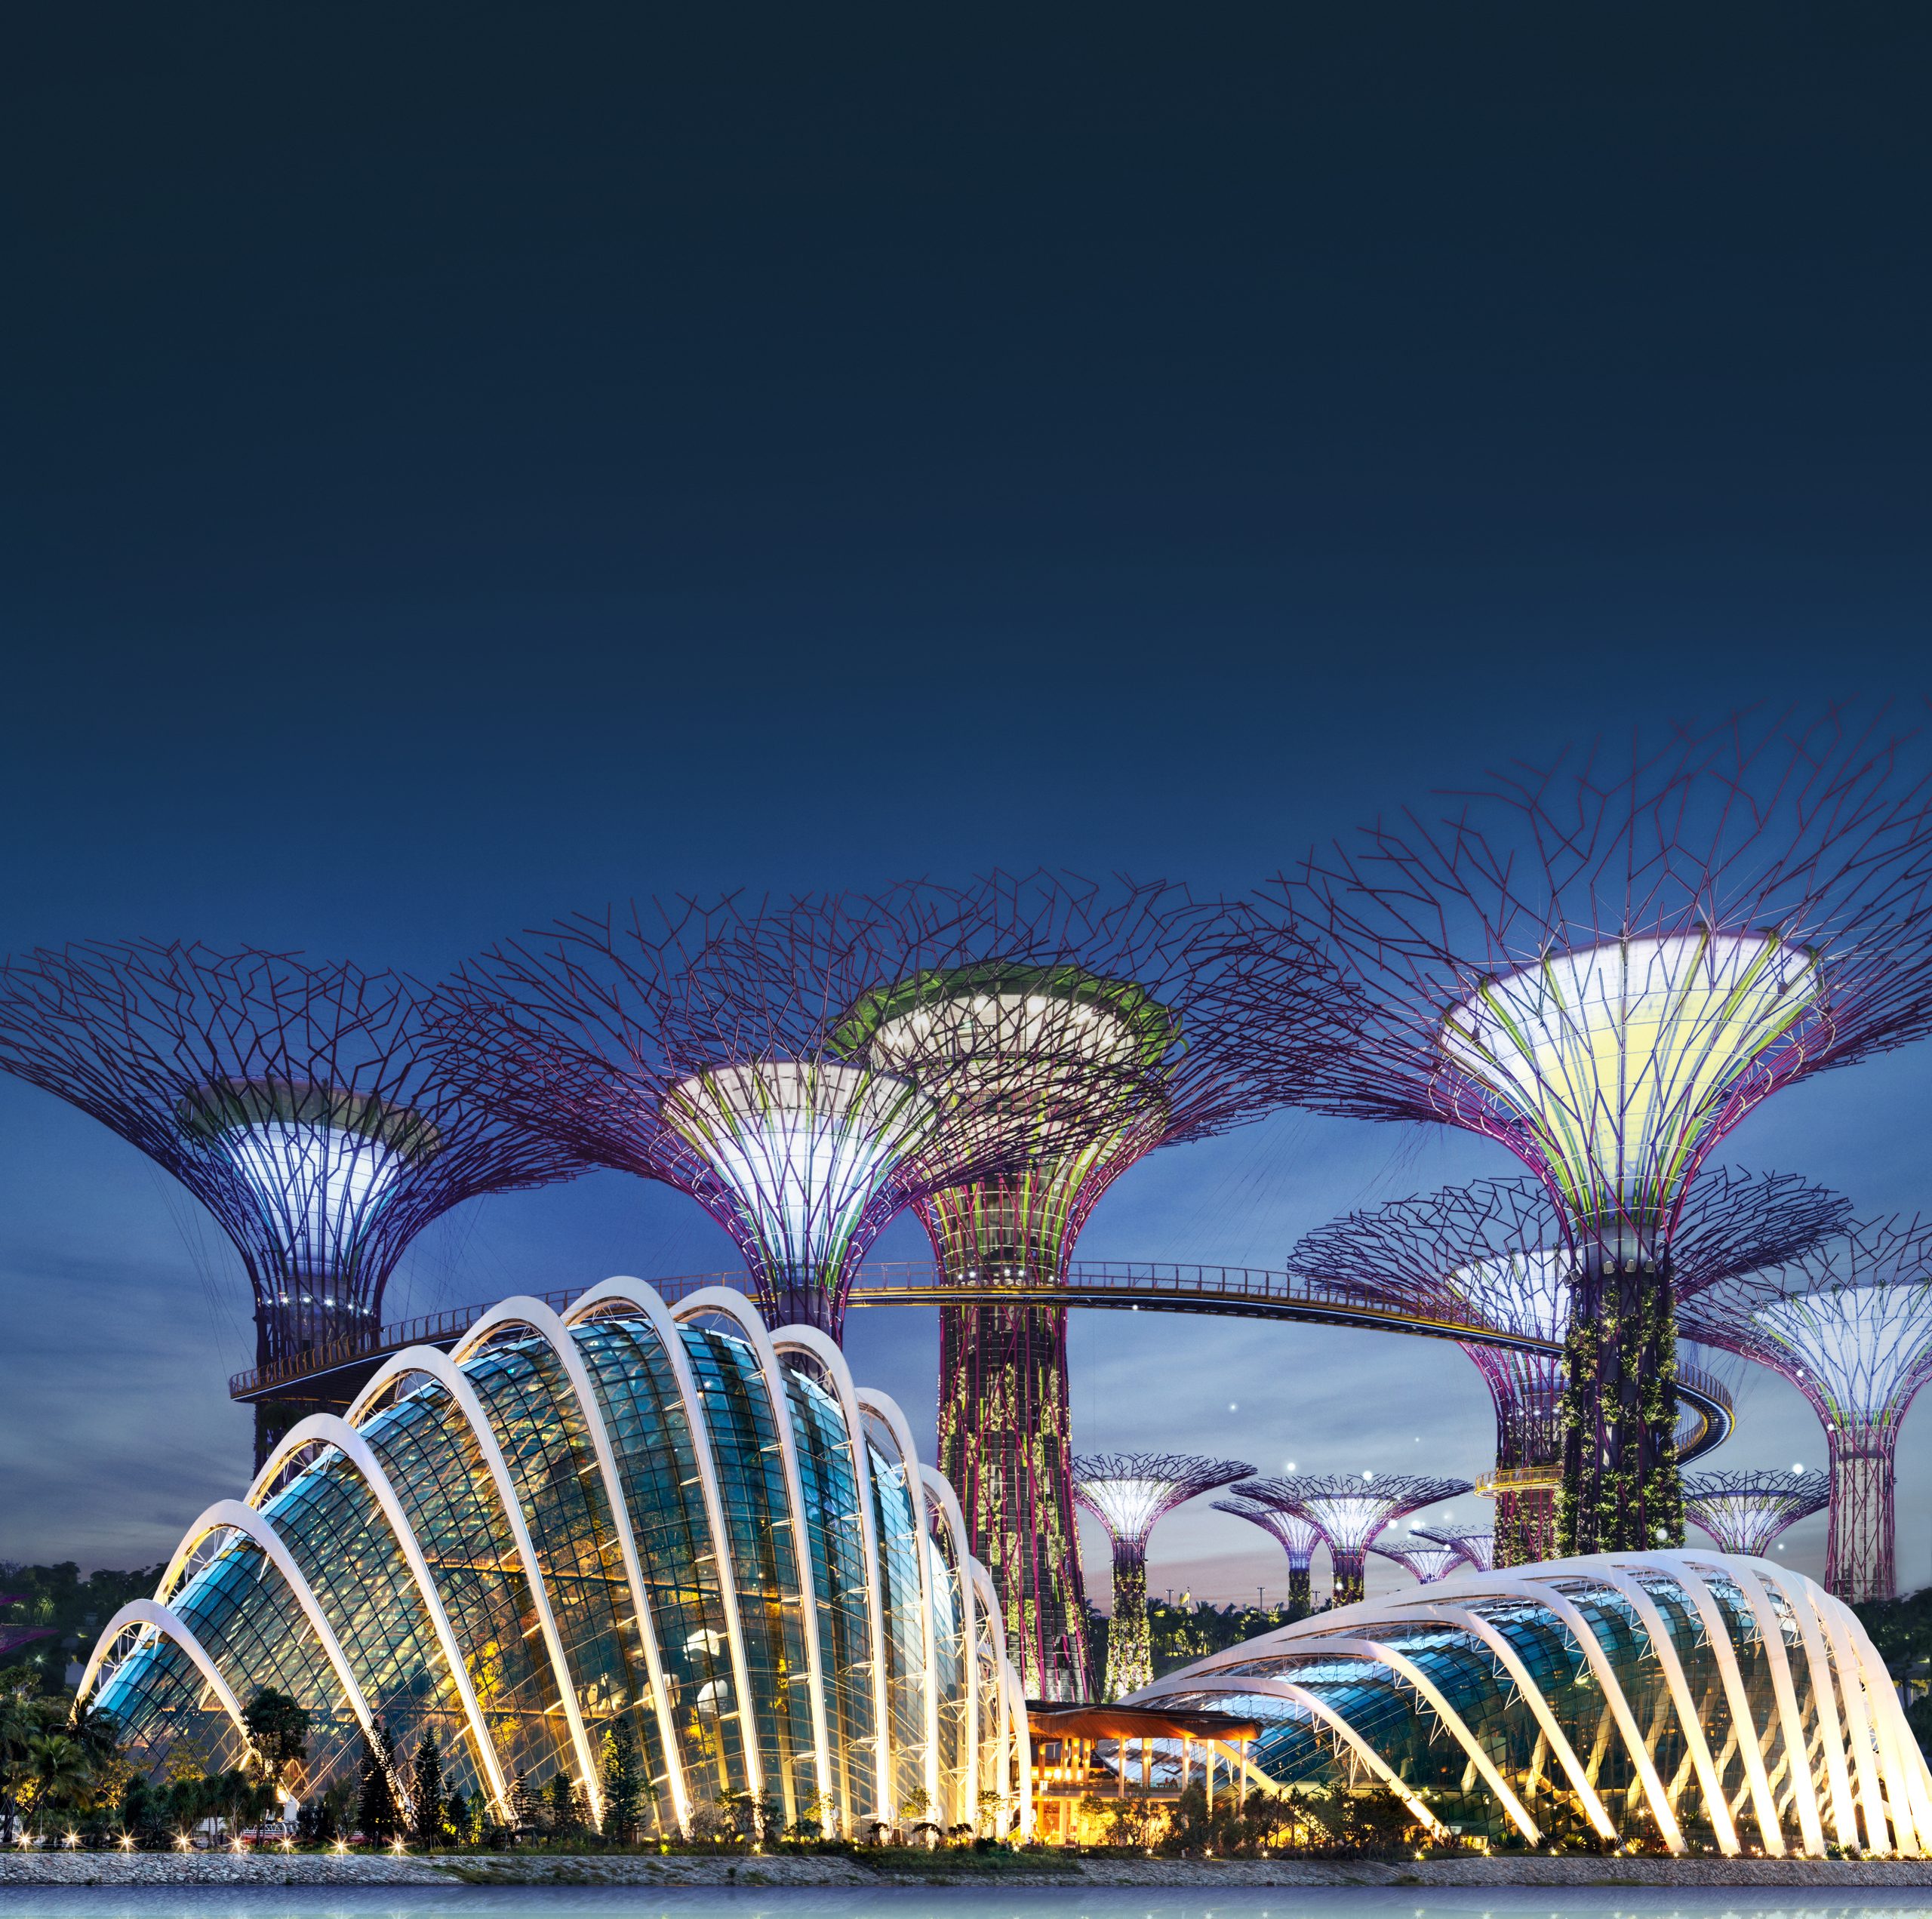 Conservatories and Supertree Grove Singapore